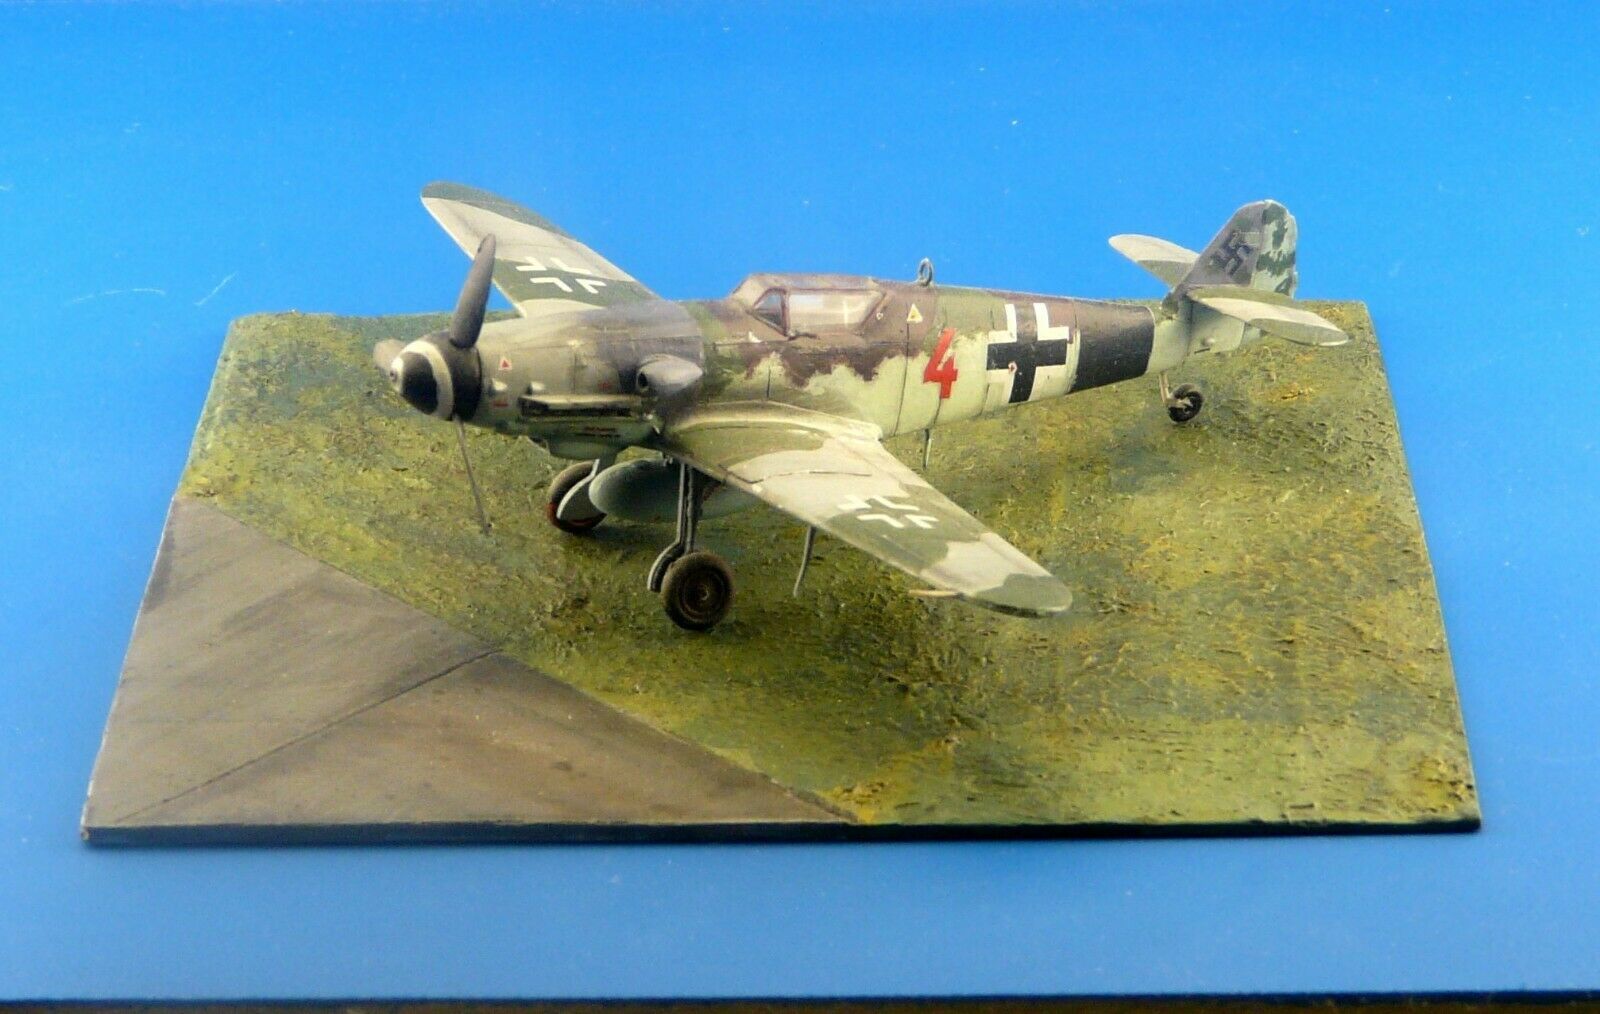 1/72 WWII Diorama Display Airfield Base For Airplane Scale Model Kits D31 - redoguk